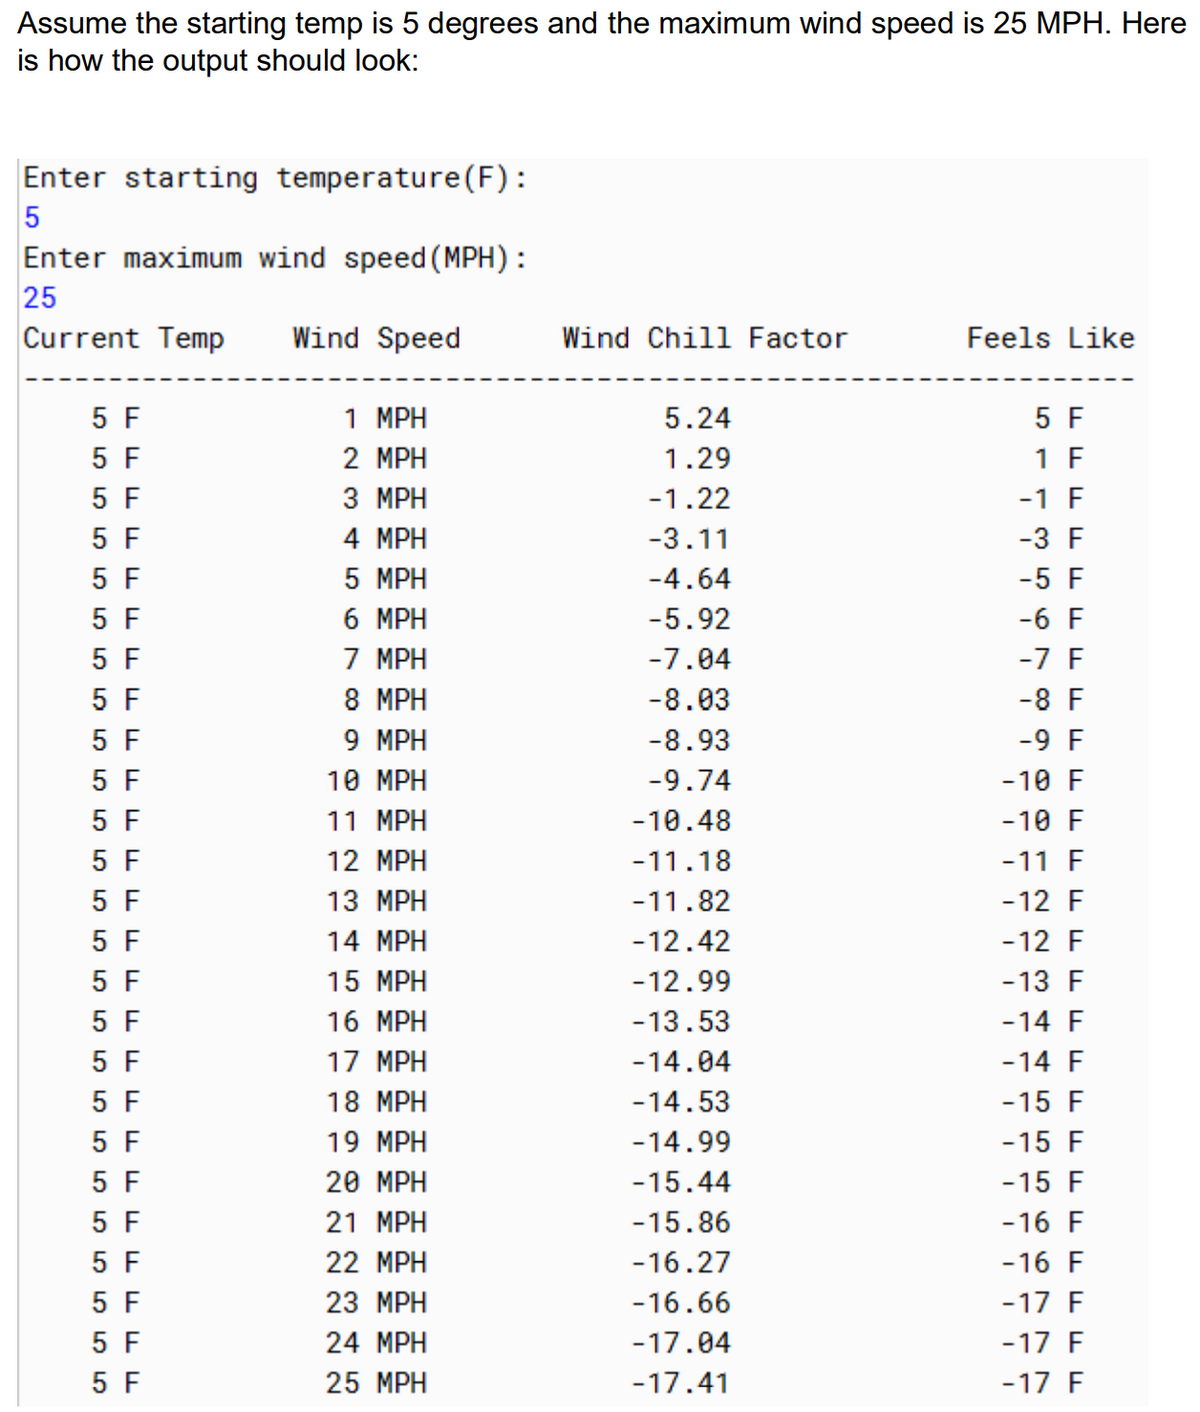 Assume the starting temp is 5 degrees and the maximum wind speed is 25 MPH. Here
is how the output should look:
Enter starting temperature(F):
5
Enter maximum wind speed (MPH) :
25
Current Temp
Wind Speed
Wind Chill Factor
Feels Like
5 F
5 F
5 F
1 MPH
5.24
5 F
2 MPH
1.29
1 F
З МРН
-1.22
-1 F
5 F
4 MPH
-3.11
-3 F
5 F
5 F
5 F
5 F
5 F
5 F
5 F
5 MPH
-4.64
-5 F
6 MPH
-5.92
-6 F
7 MPH
8 MPH
9 MPH
-7.04
-7 F
-8.03
-8 F
-8.93
-9 F
10 MPH
-9.74
-10 F
11 MPH
-10.48
-10 F
5 F
12 MPH
-11.18
-11 F
5 F
5 F
13 MPH
-11.82
-12 F
14 MPH
-12.42
-12 F
5 F
15 MPH
-12.99
-13 F
5 F
16 MPH
-13.53
-14 F
5 F
17 MPH
-14.04
-14 F
5 F
18 MPH
-14.53
-15 F
5 F
5 F
19 MPH
-14.99
-15 F
20 MPH
-15.44
-15 F
5 F
21 MPH
-15.86
-16 F
5 F
5 F
5 F
5 F
22 MPH
-16.27
-16 F
23 MРH
-16.66
-17 F
24 MPH
-17.04
-17 F
25 MPH
-17.41
-17 F
